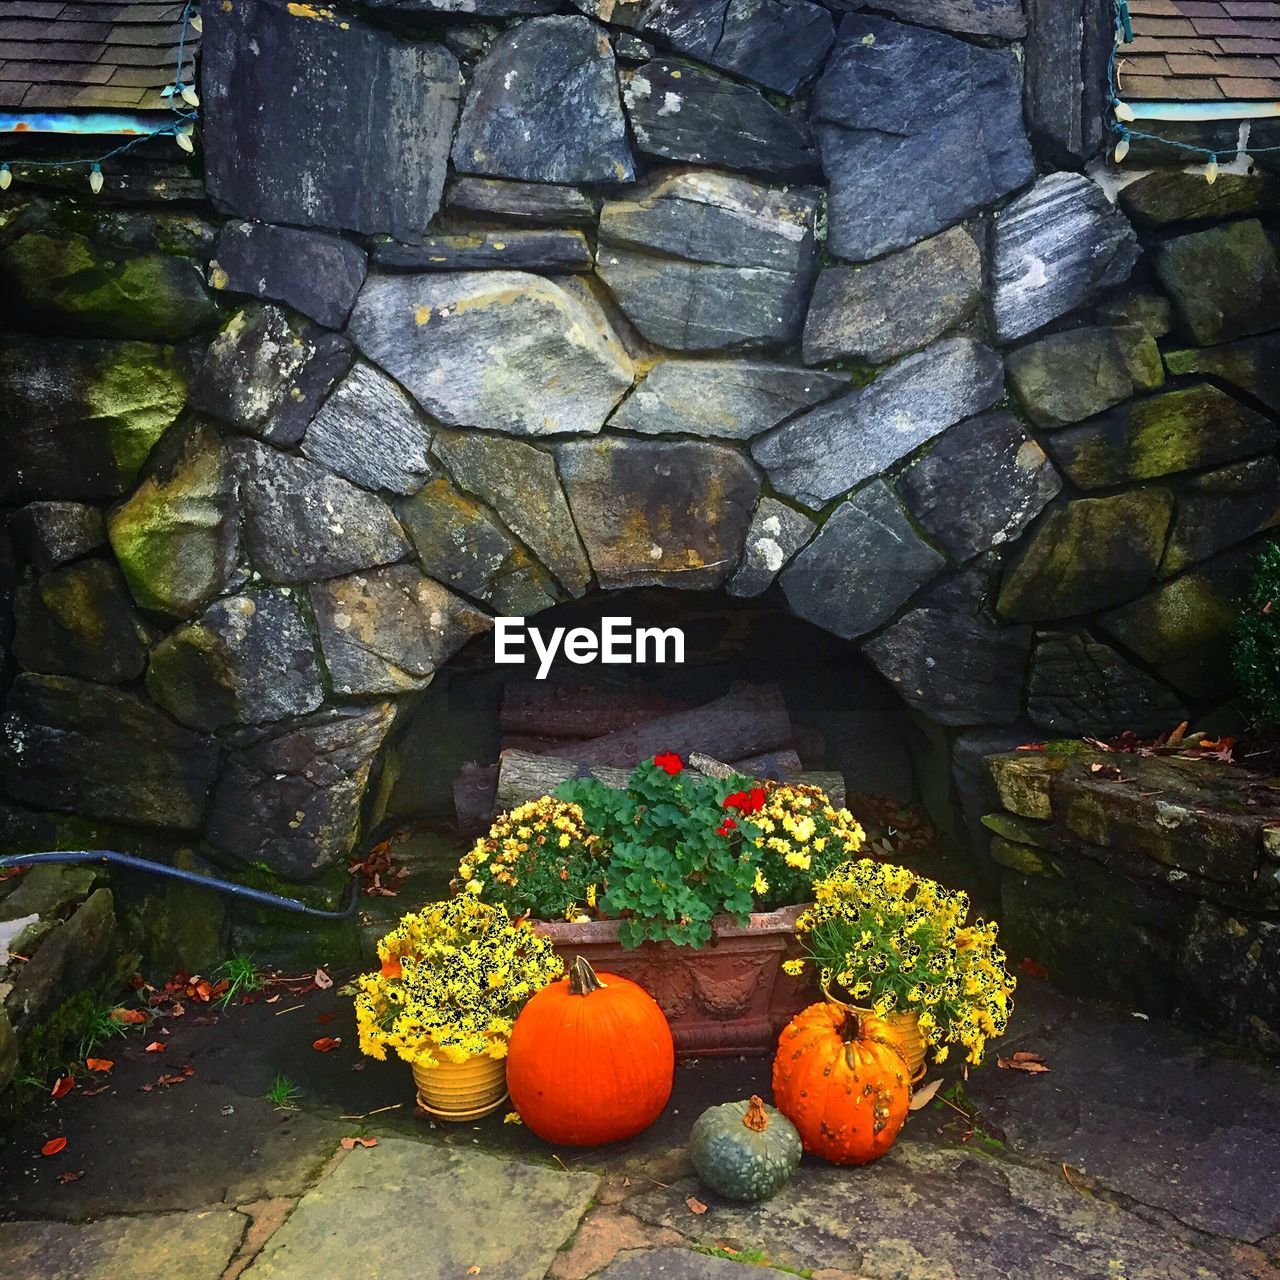 VIEW OF PUMPKINS ON STONE